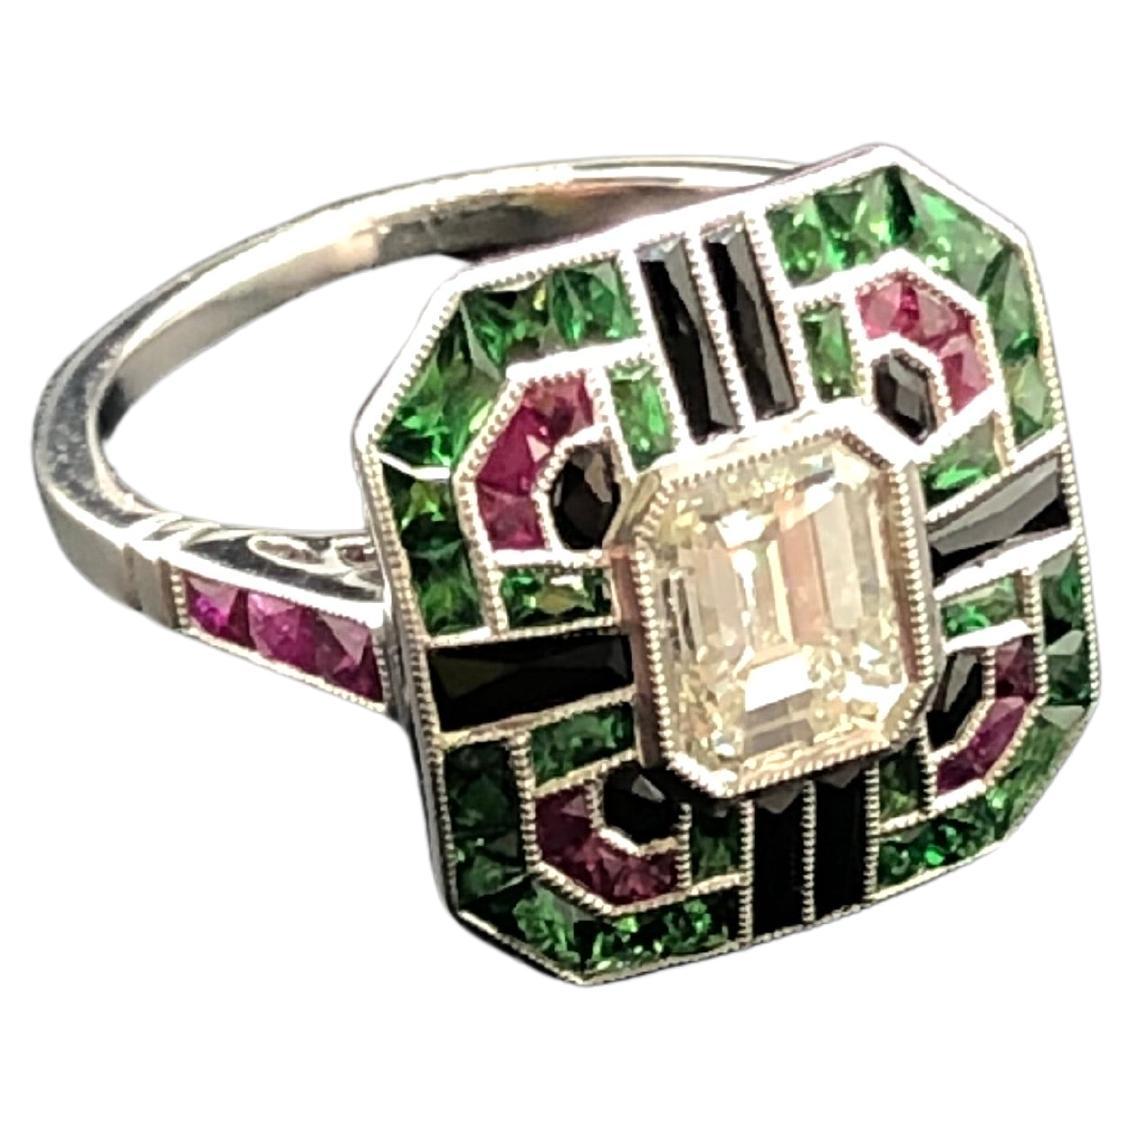 An Art Deco style cocktail ring featuring a single emerald-cut diamond weighing approximately 0.90 CTS, set in platinum within a frame of  French-cut tsavorite, ruby and black onyx gem-stones, with rubies to the shank, back of ring with intricate